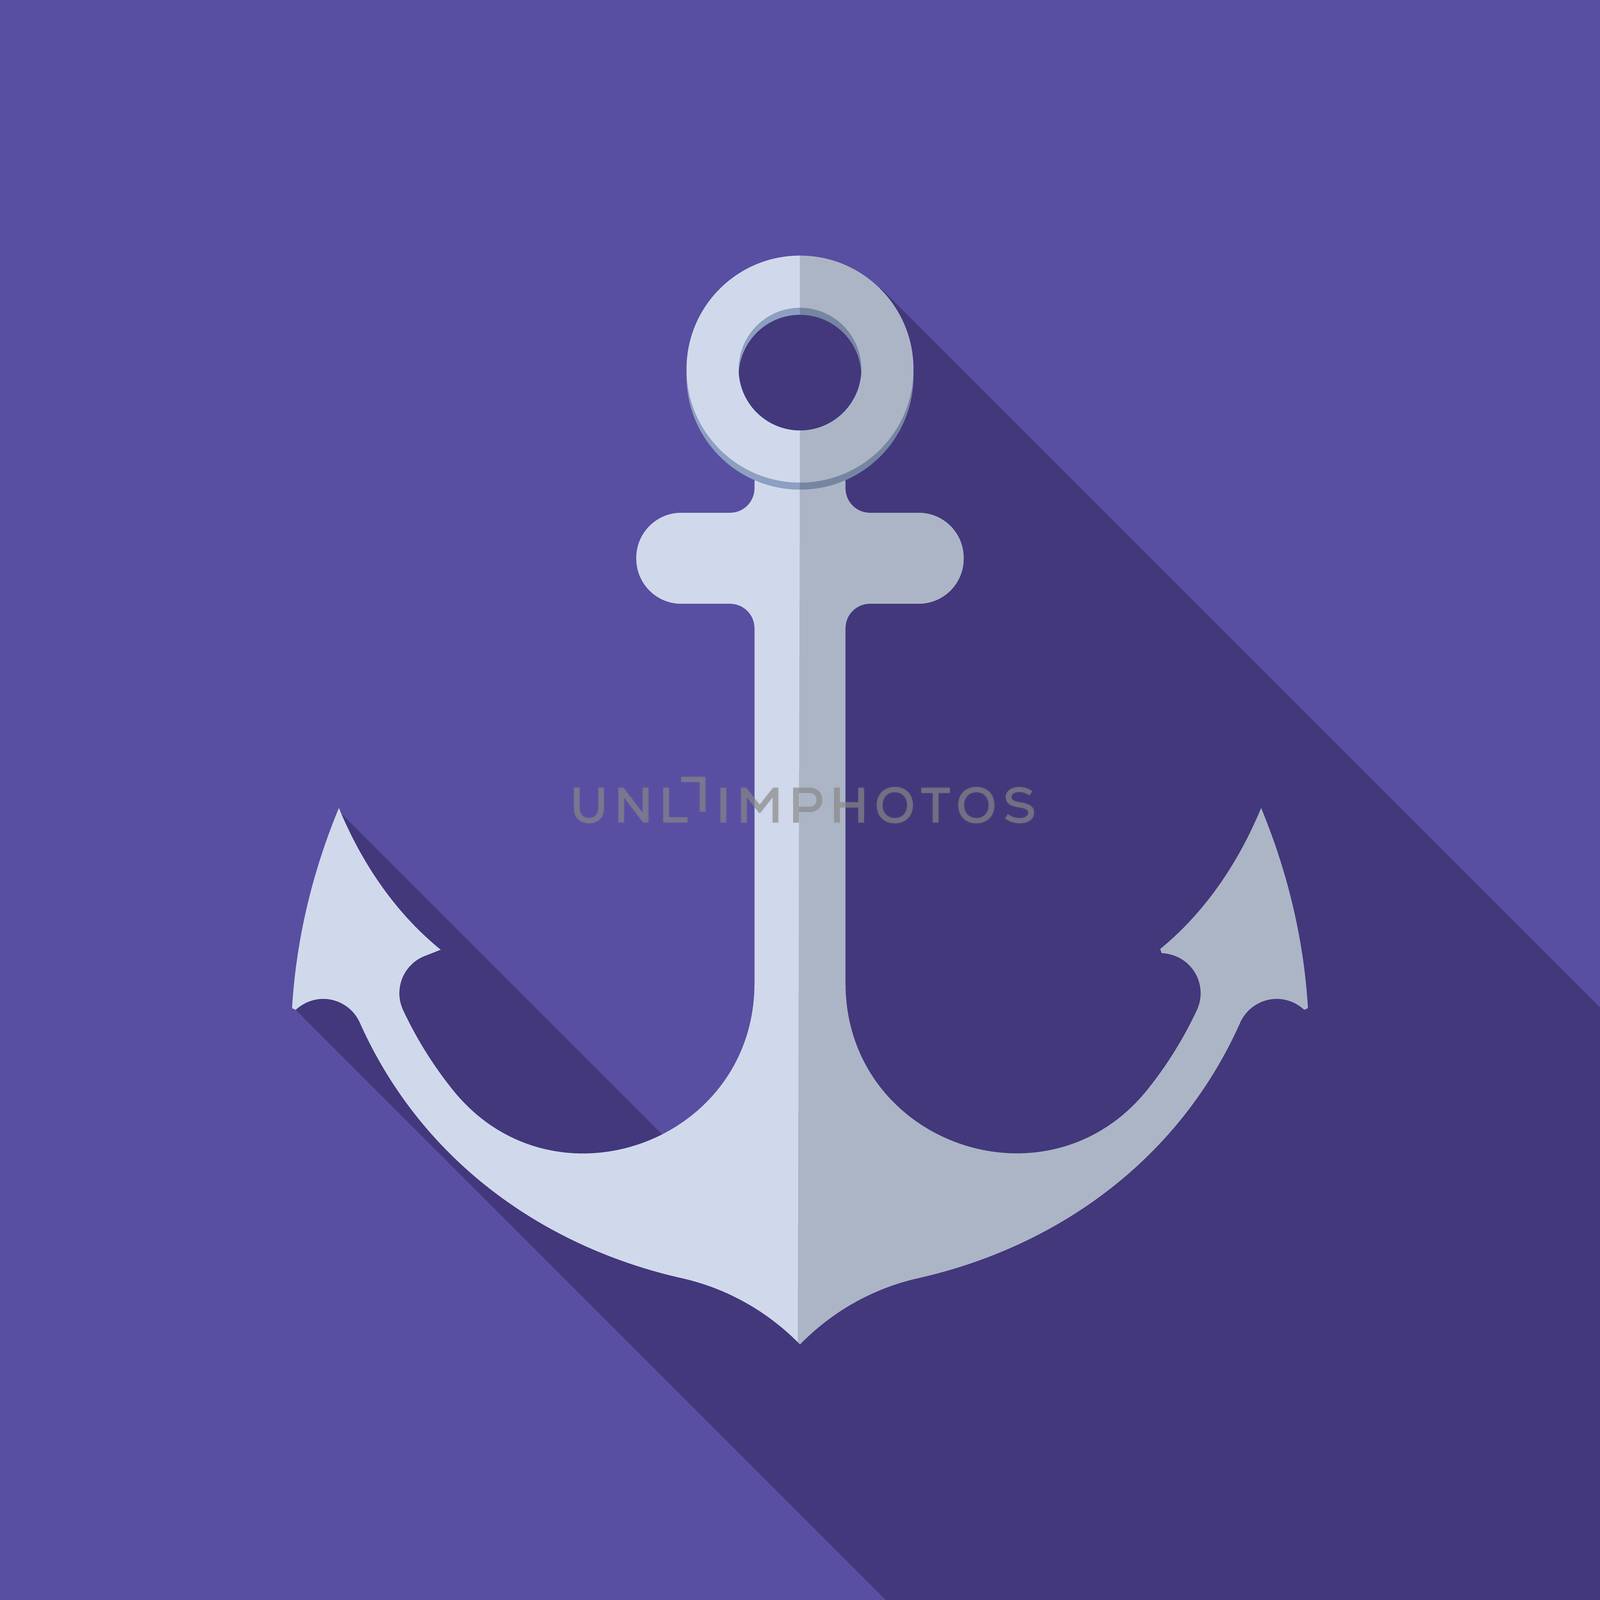 Flat design modern vector illustration of anchor icon with long shadow.